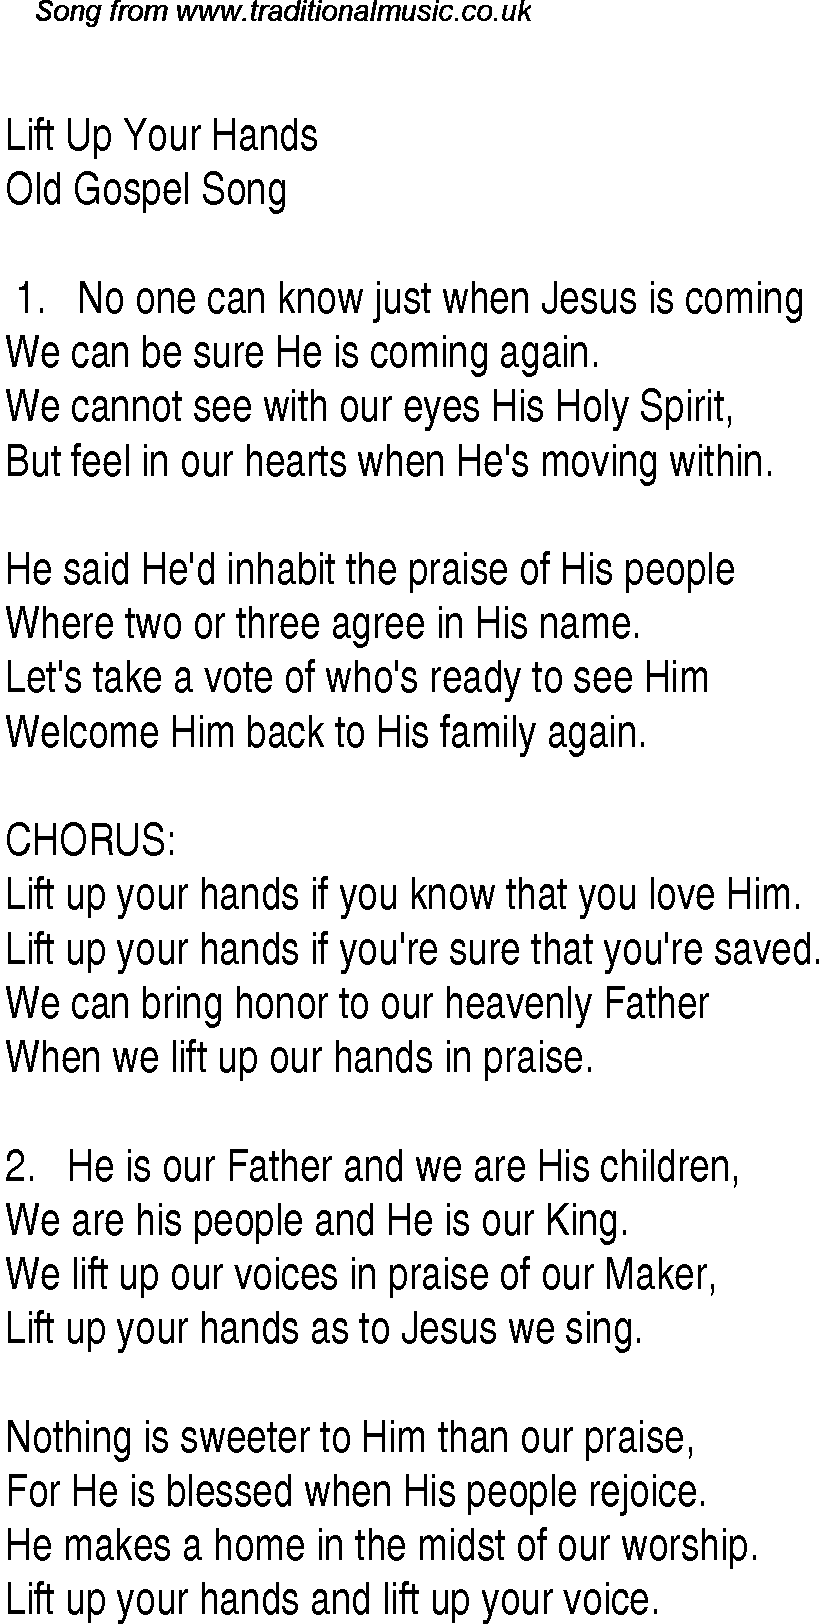 Gospel Song: lift-up-your-hands, lyrics and chords.